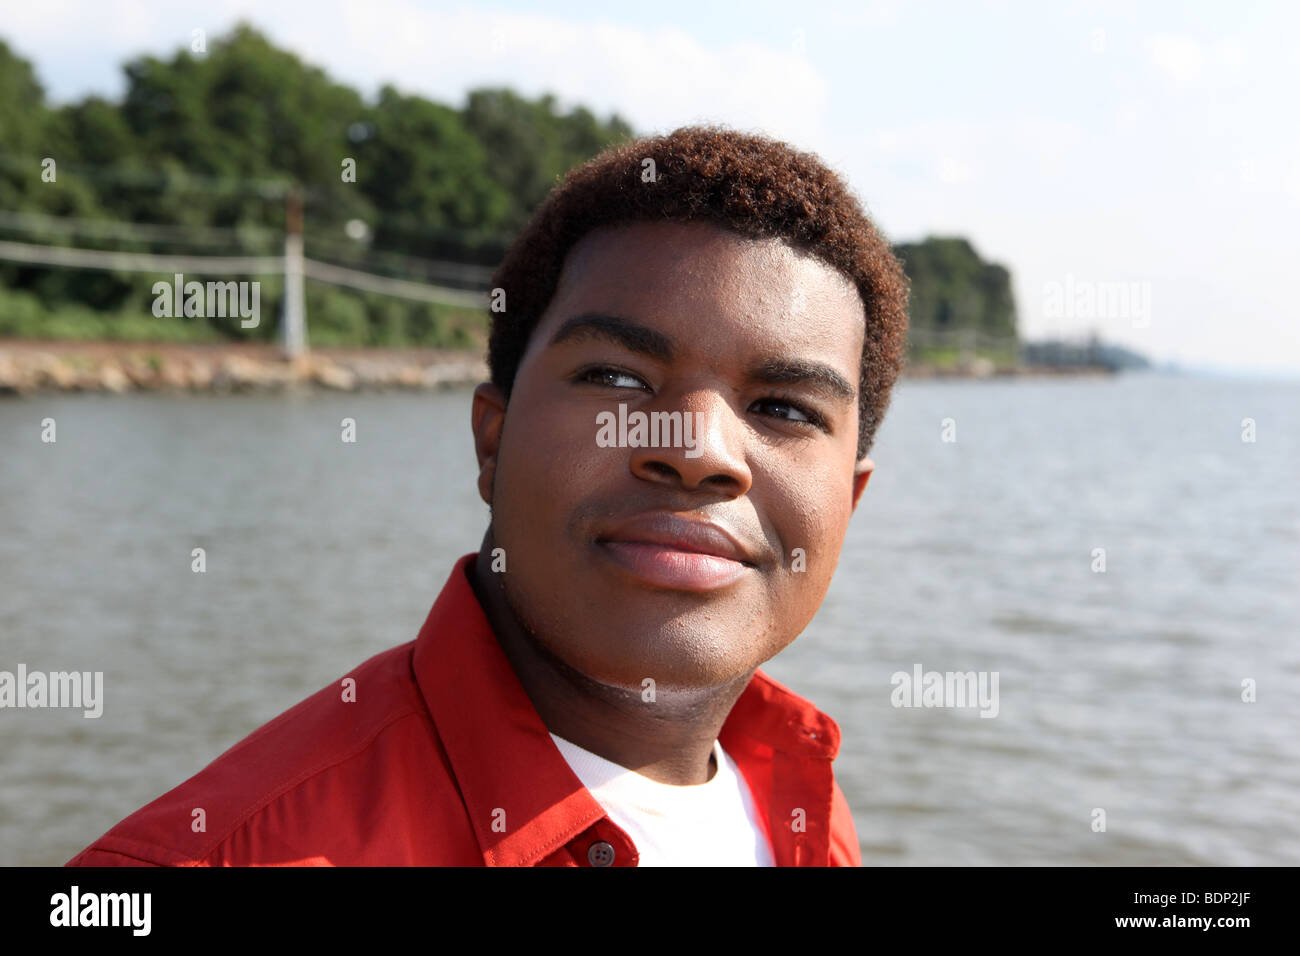 Portrait of young gay man at a Hudson River park in Westchester County, New York - portrait-of-young-gay-man-at-a-hudson-river-park-in-westchester-county-BDP2JF